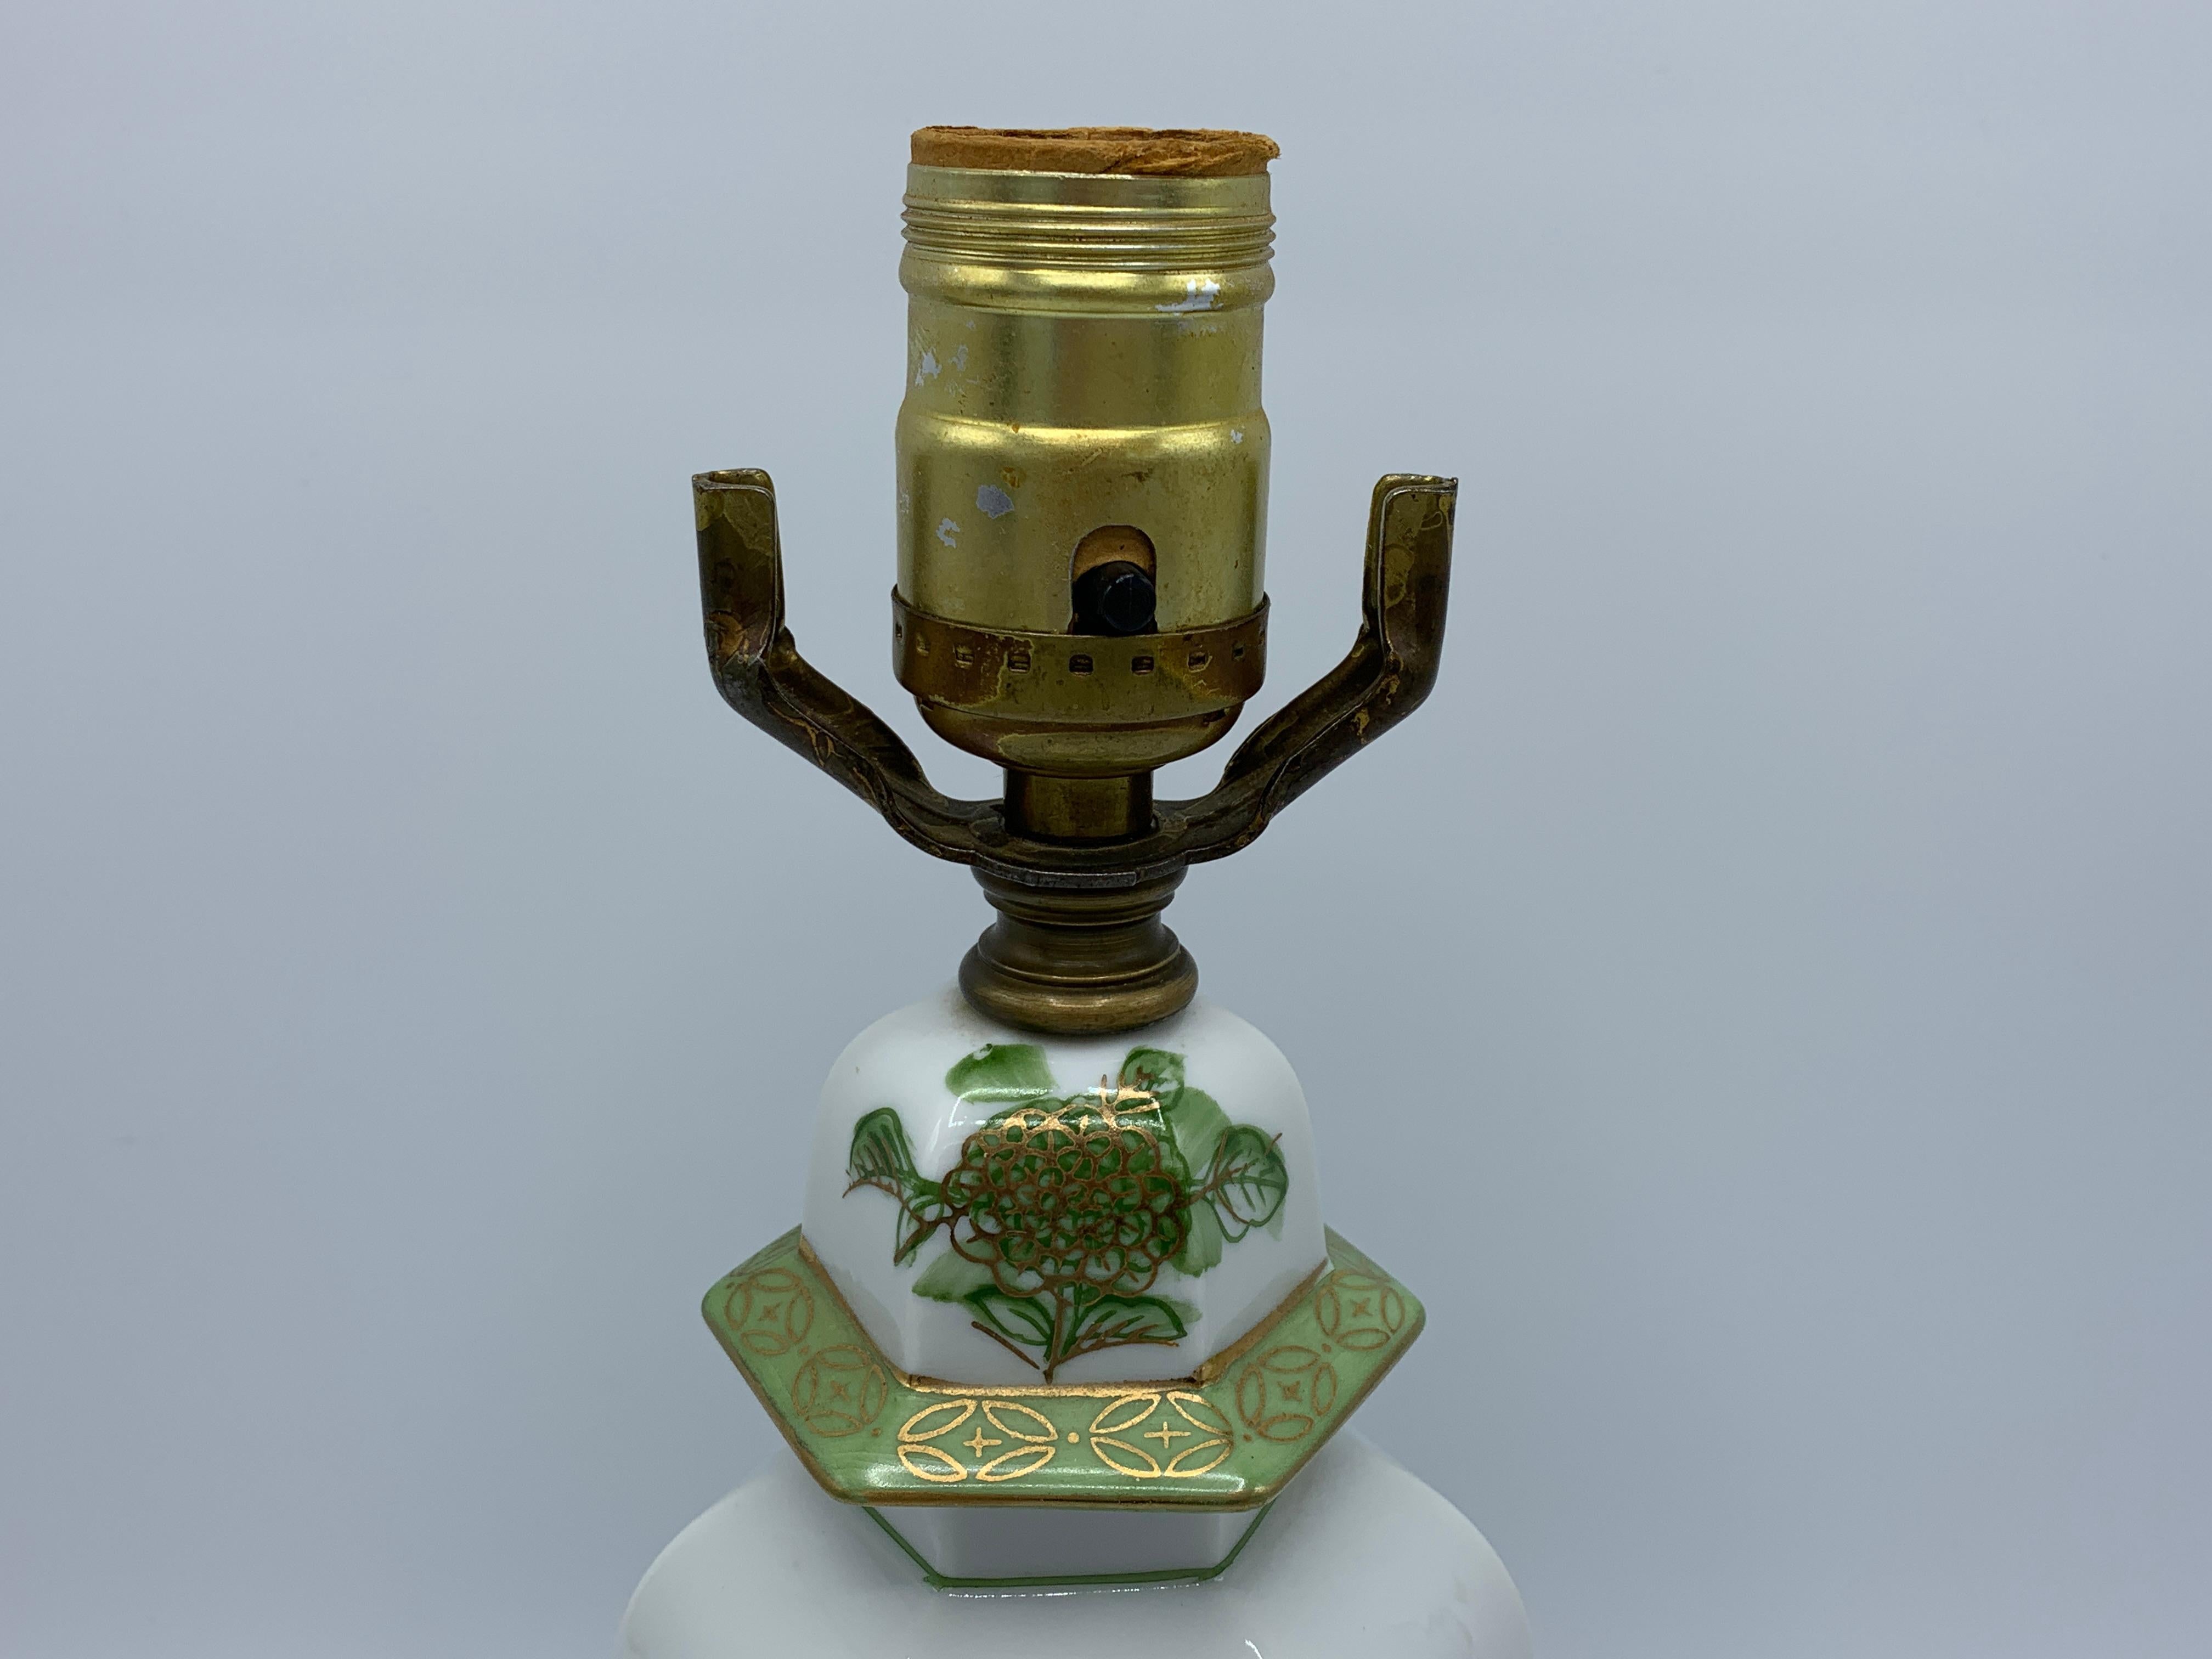 Offered is a gorgeous, 1970s Gold Imari style, green and white ginger jar lamp. The piece has an allover floral peony motif and is attached to a decorative wood base.